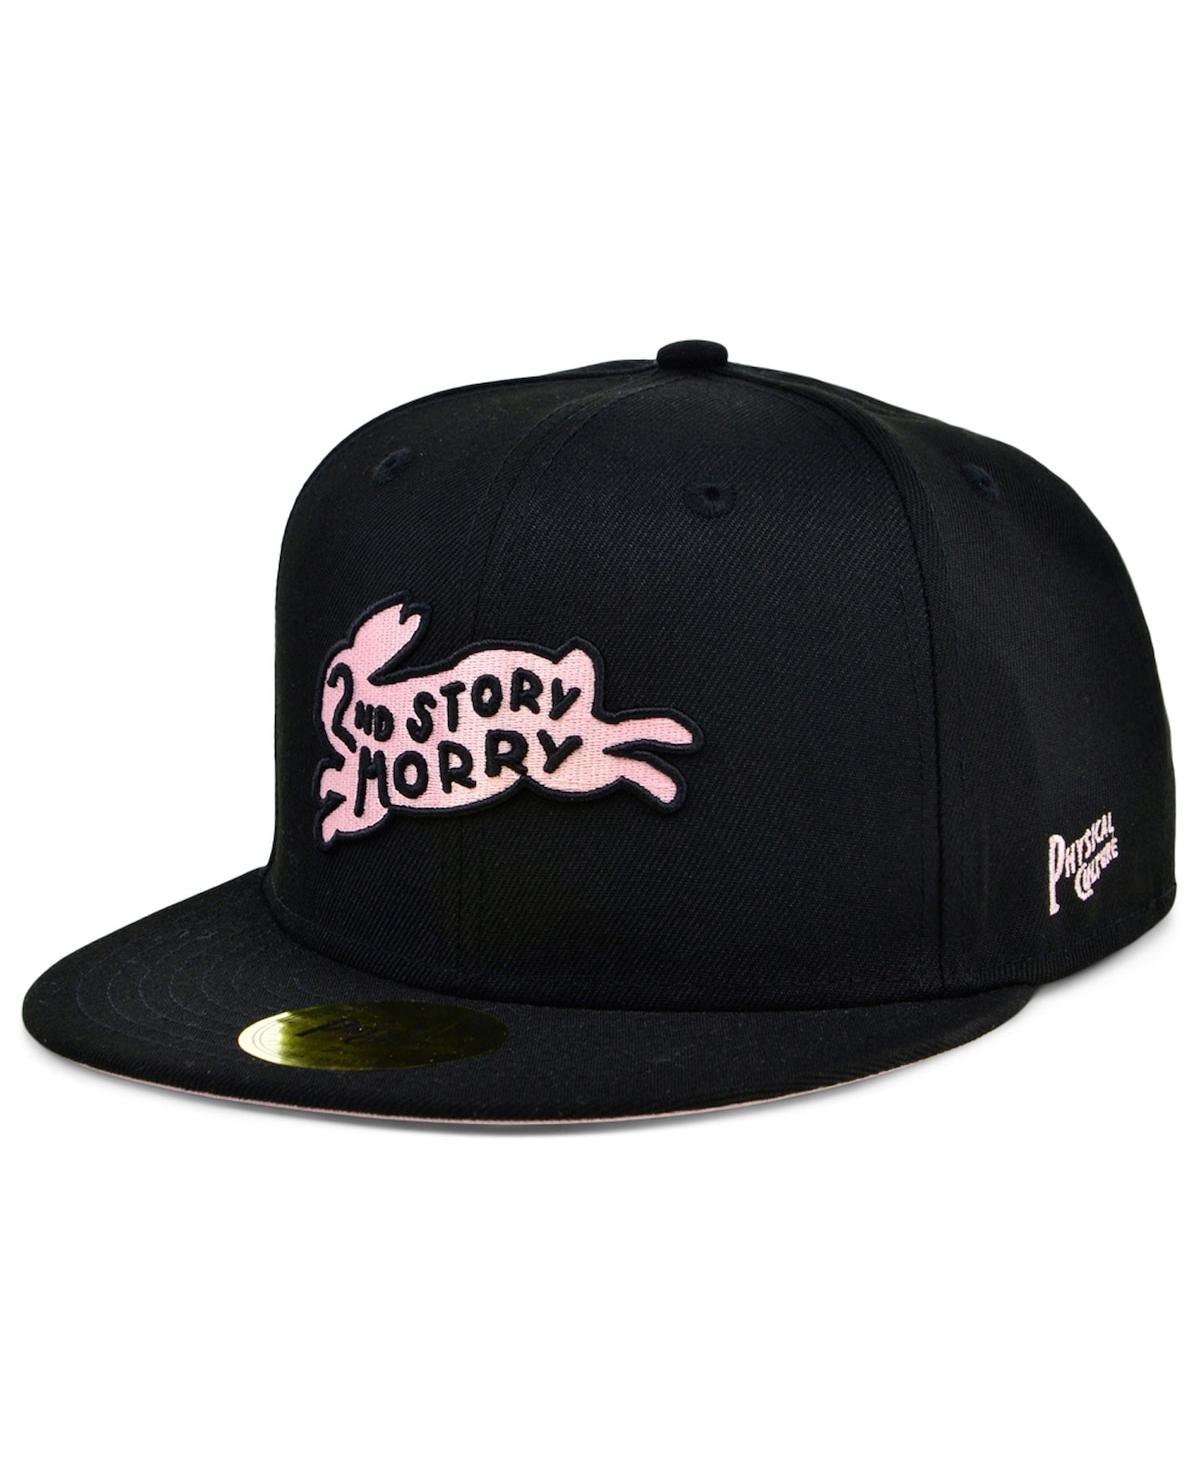 Physical Culture Men's  Black Second Story Morrys Black Fives Fitted Hat